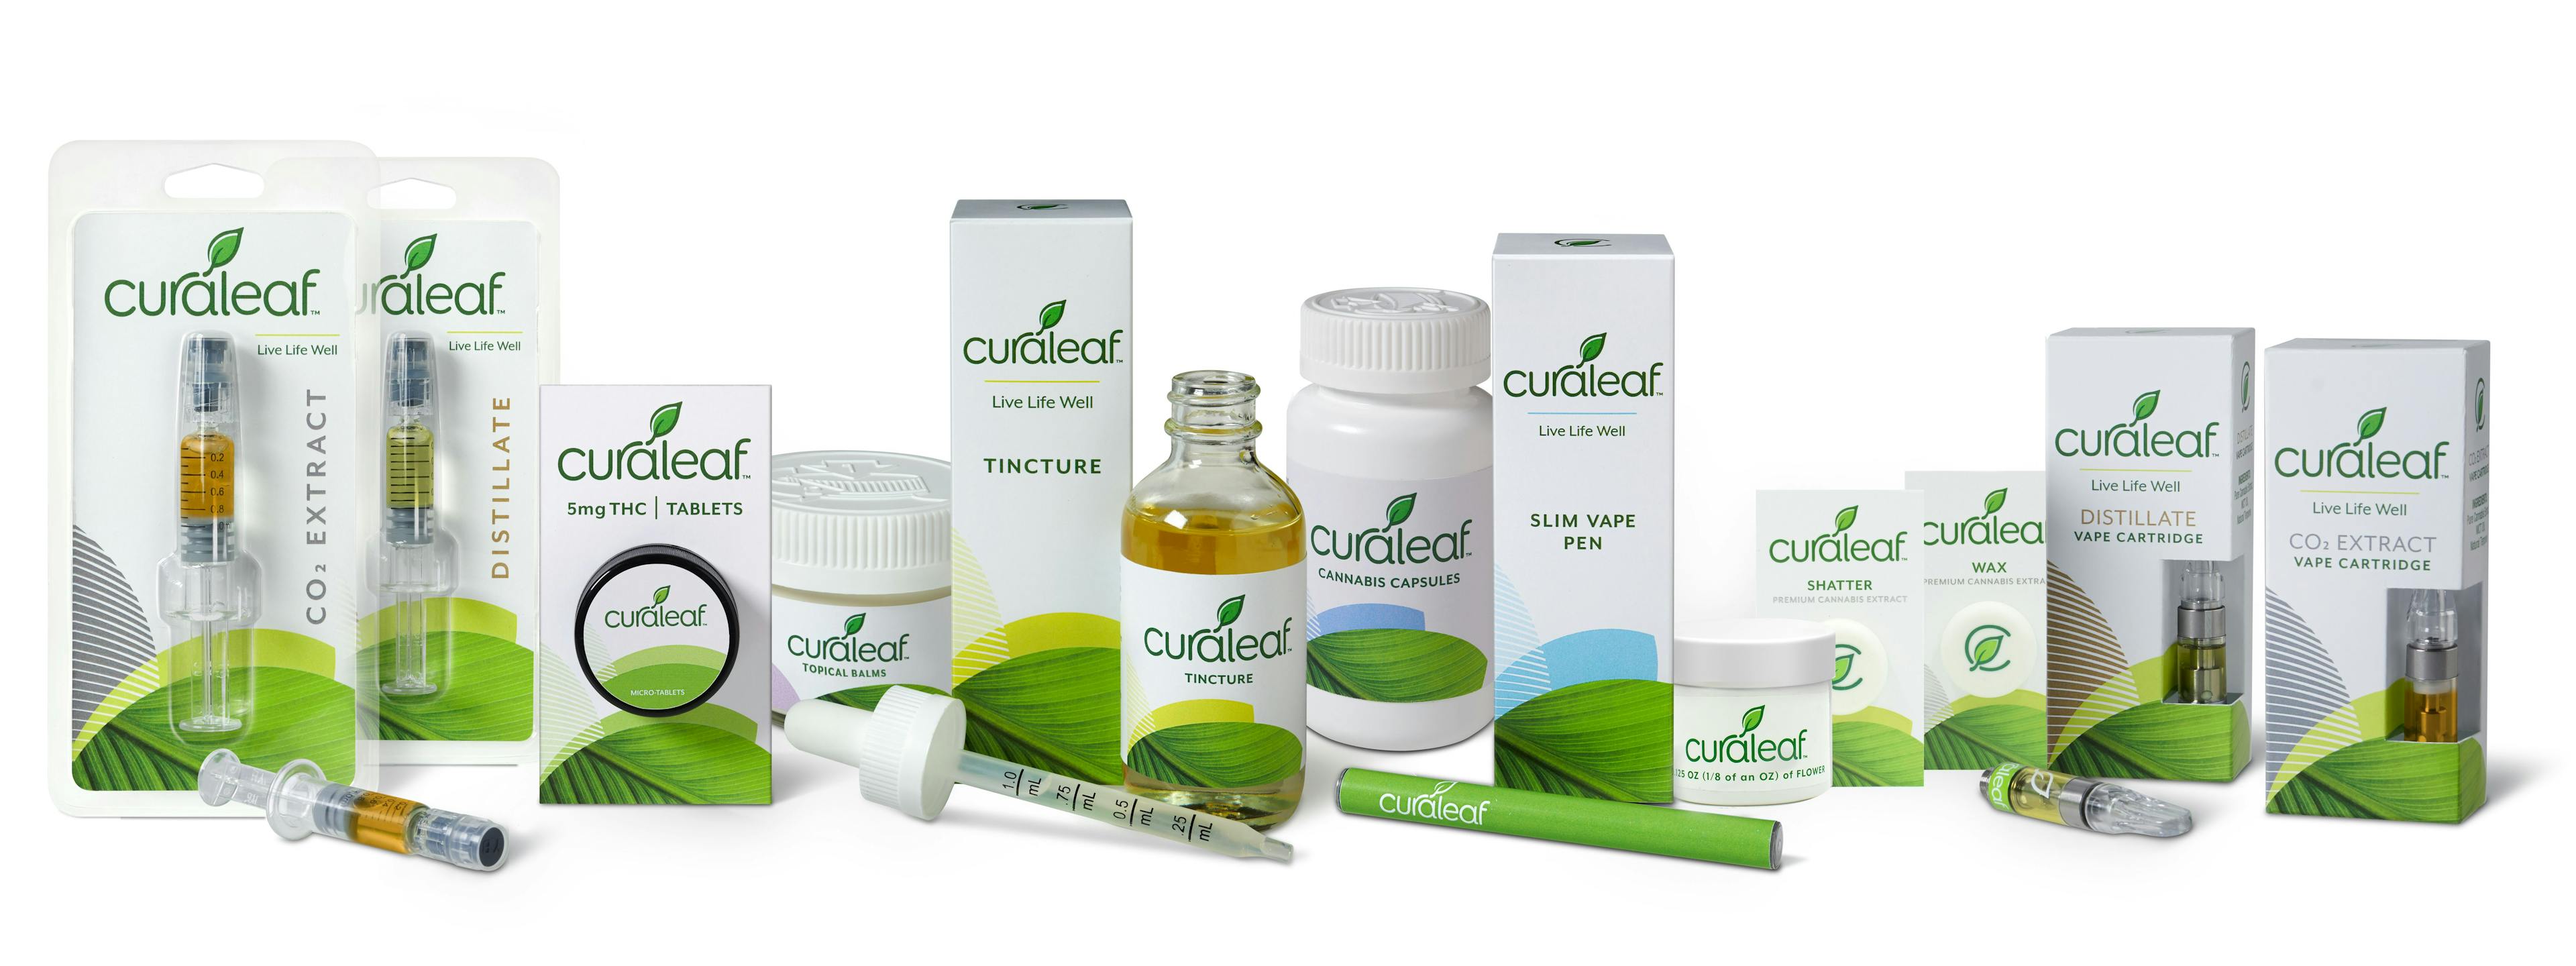 curaleaf product lineup